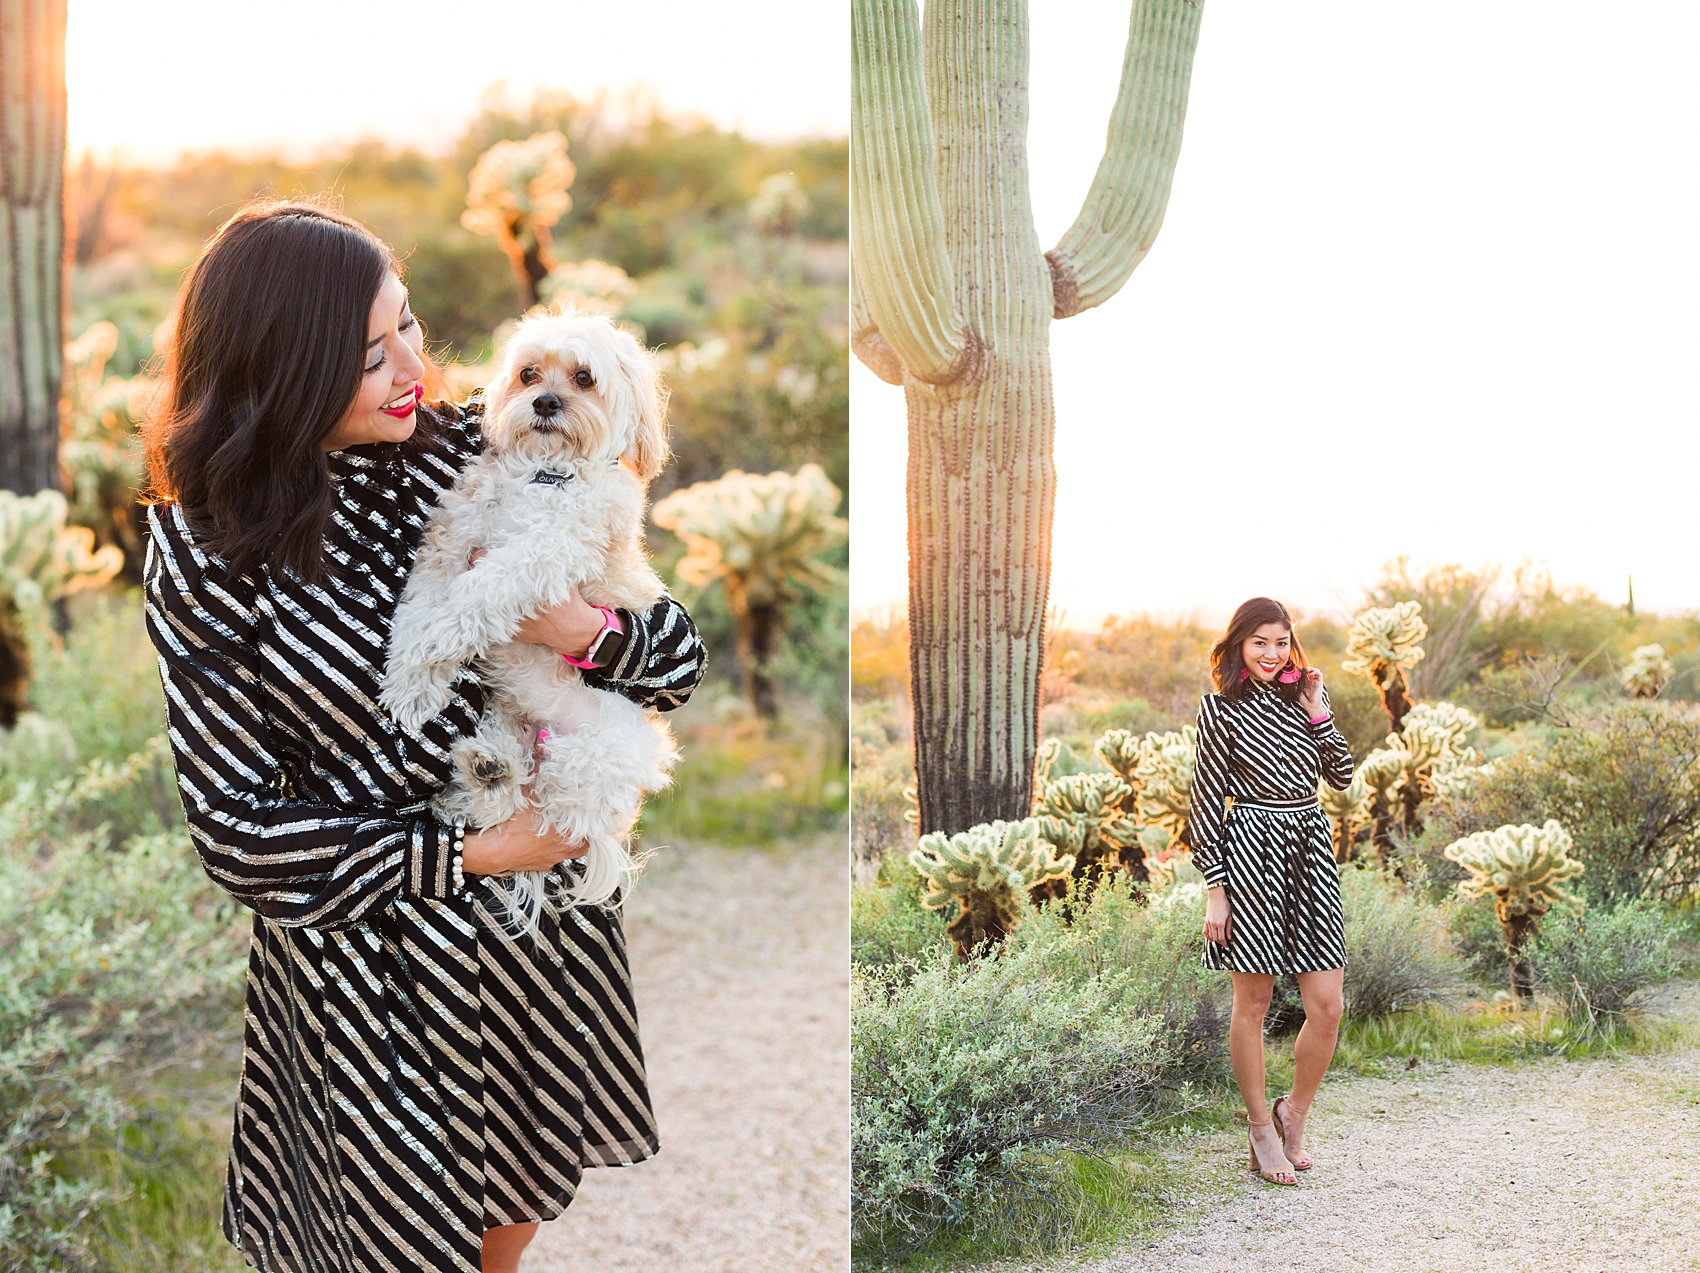 Leah Hope Photography | Scottsdale Phoenix Arizona Photographer | Desert Landscape Cactus Mountain Scenery Sunset Colors | Fitness Lifestyle Women Portraits | Brand Pictures | What to Wear